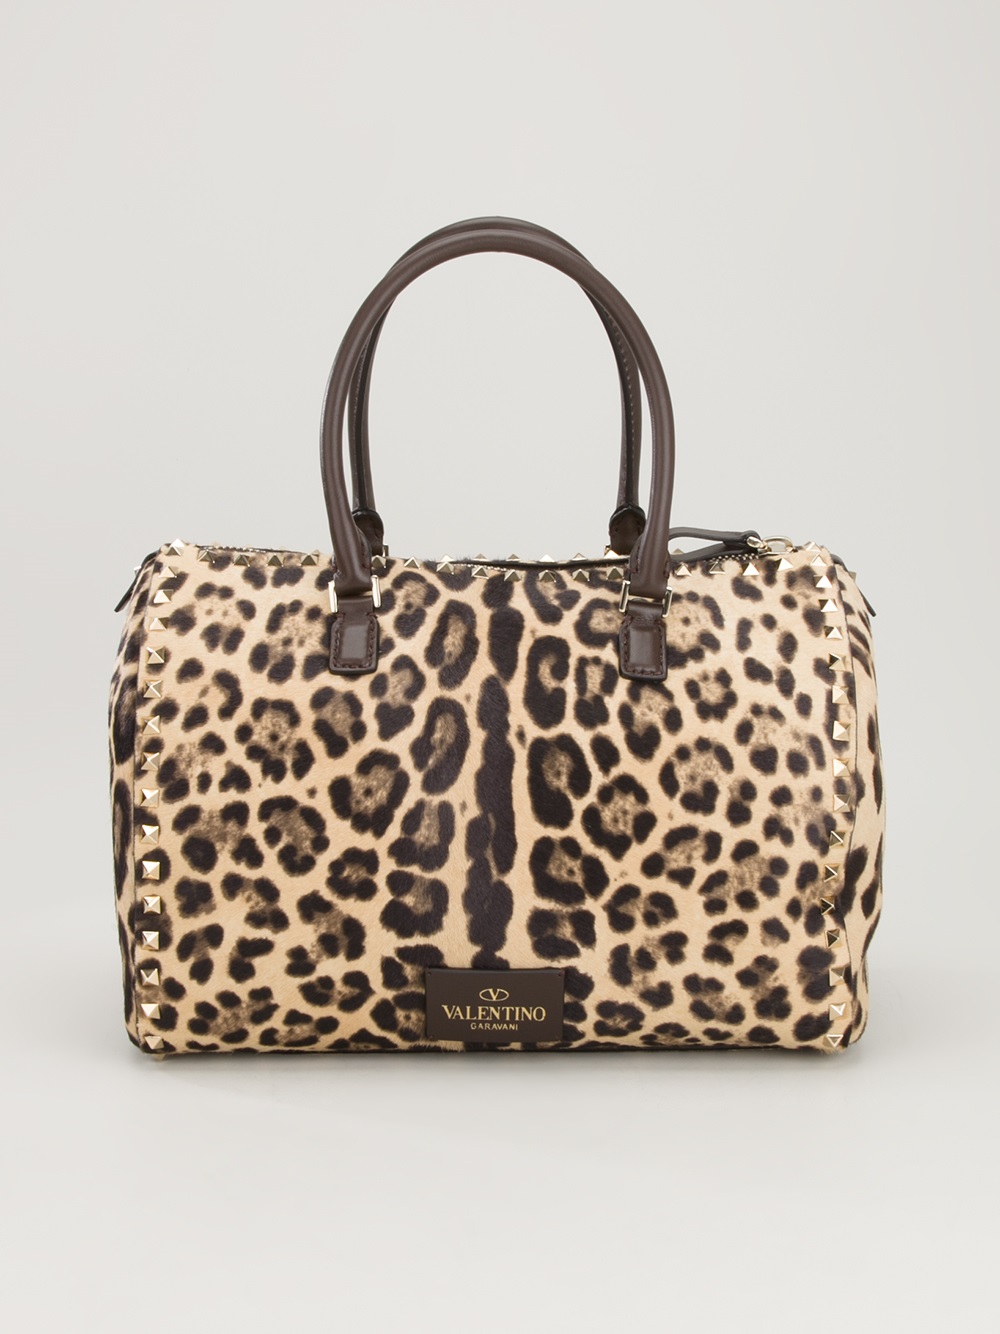 Valentino Leopard Print Duffle Bag in Natural - Lyst